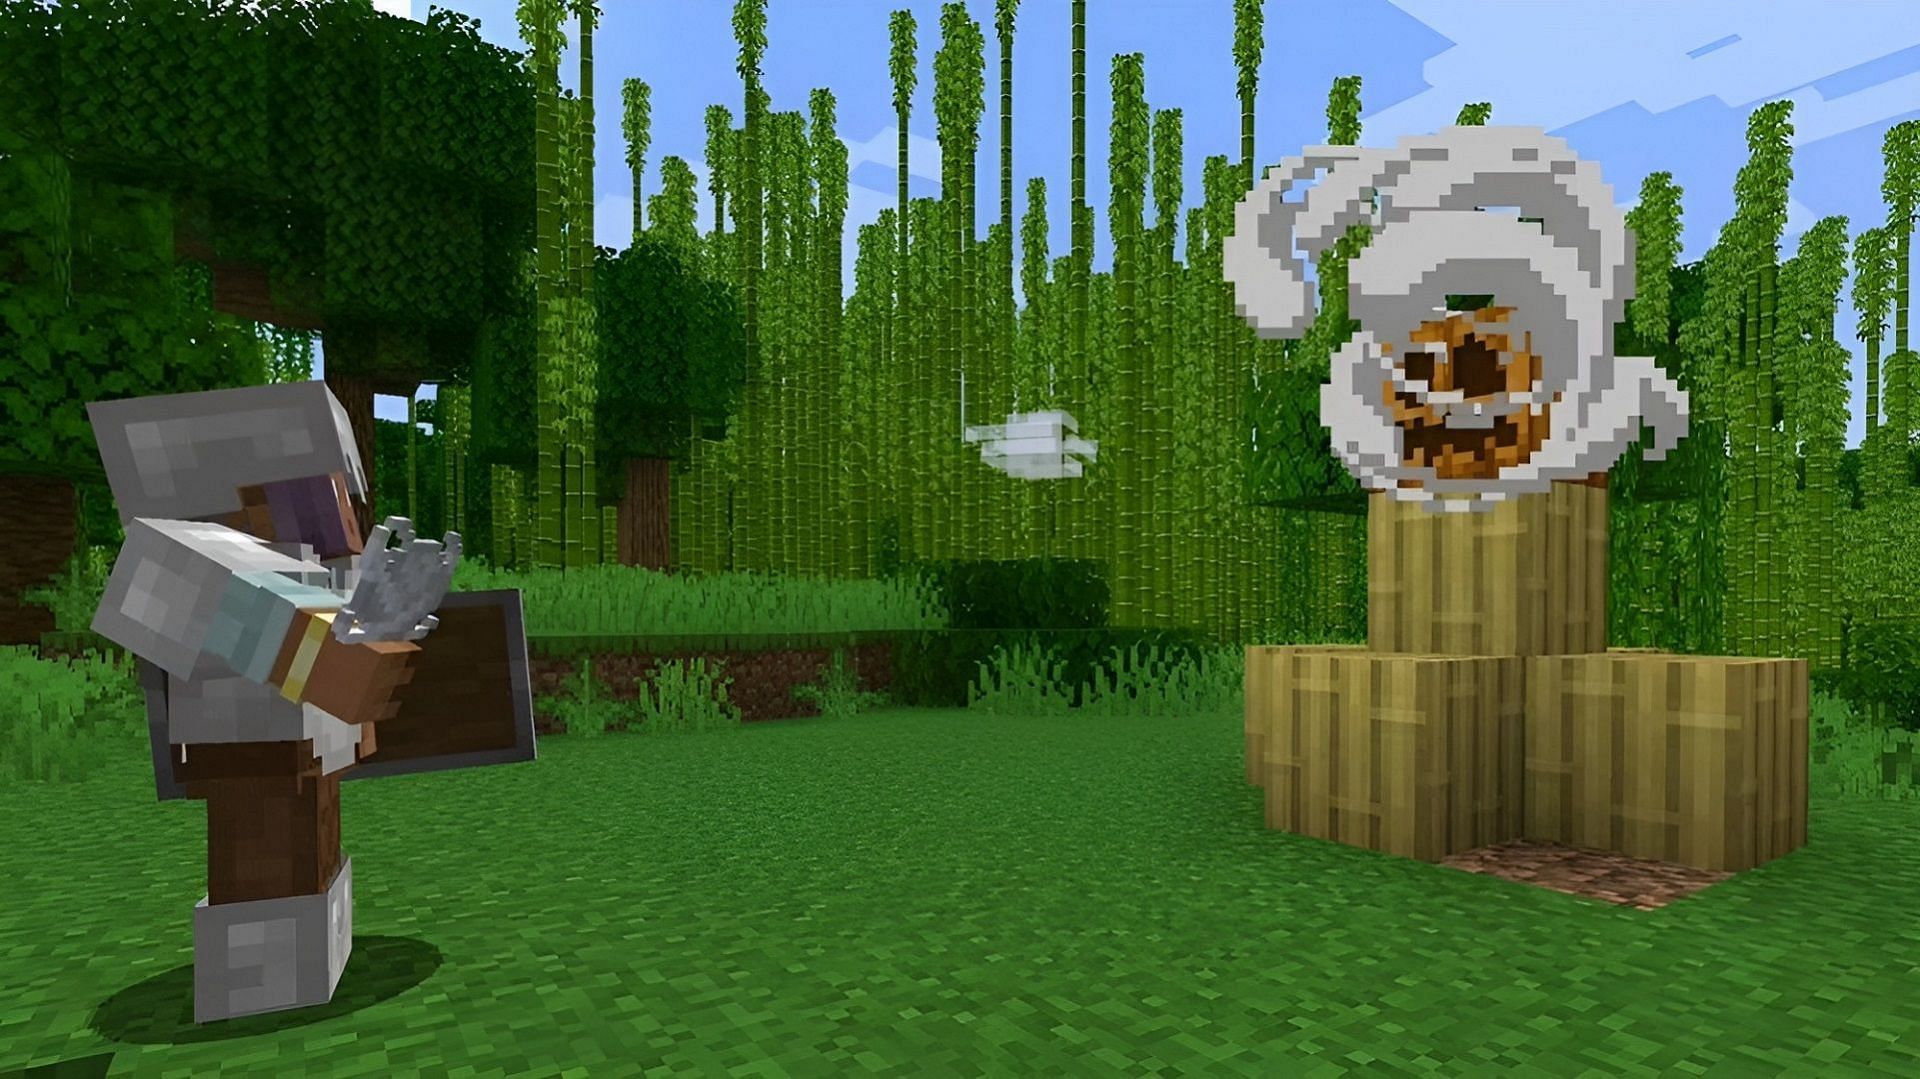 Wind charges present tons of fun applications. (Image via Mojang)